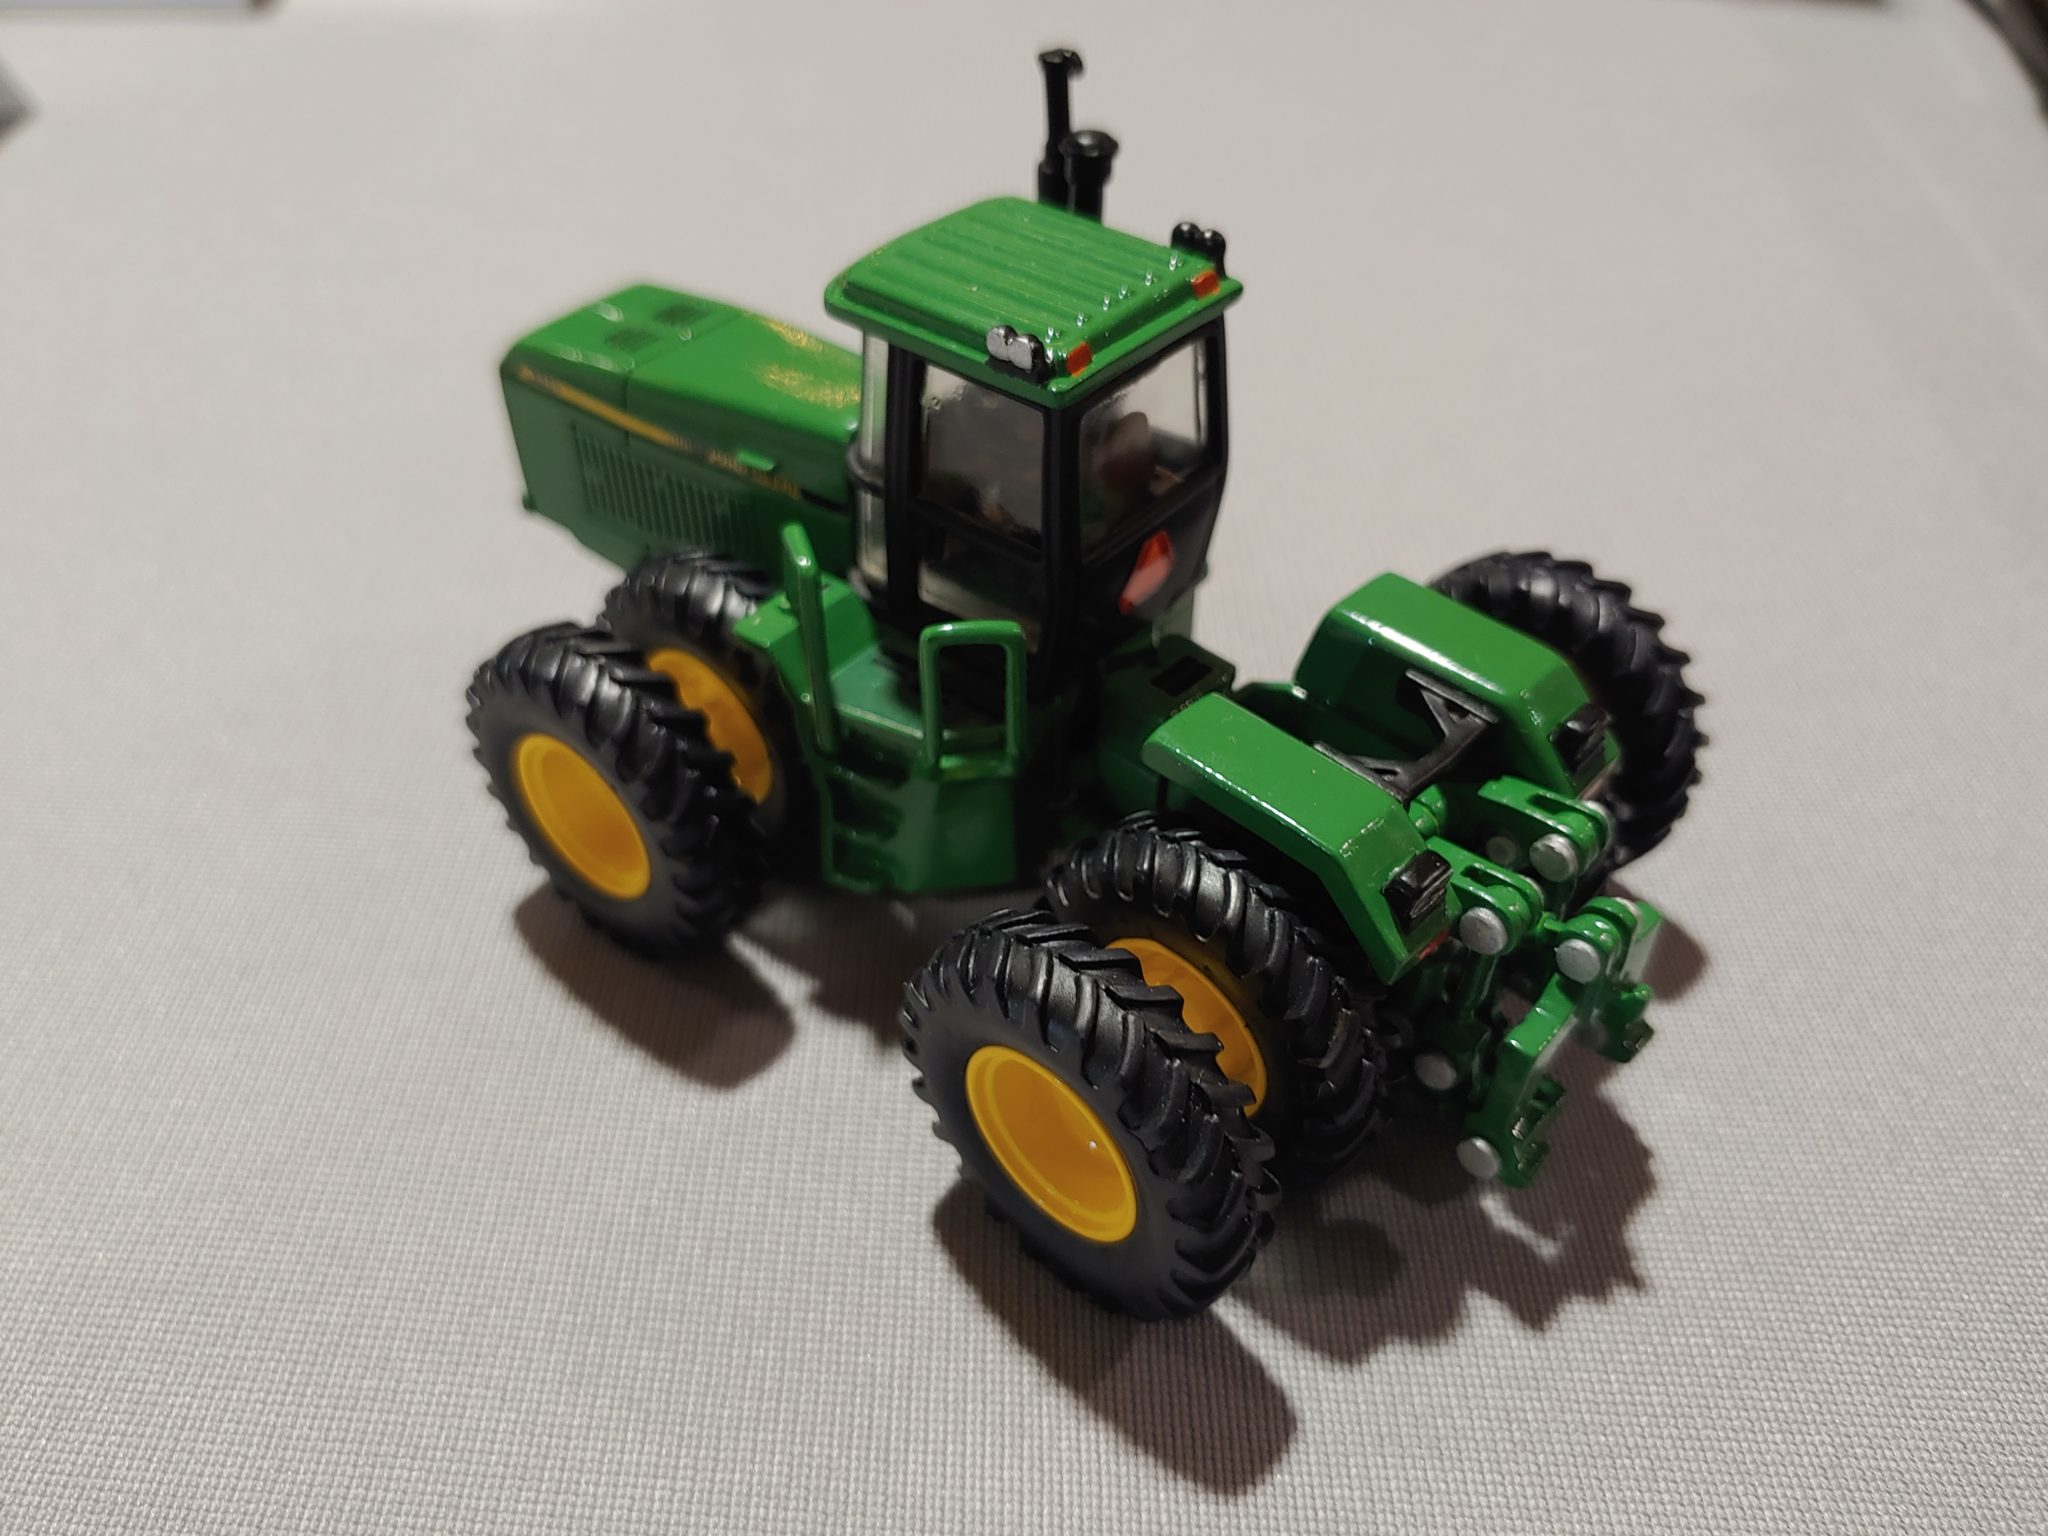 John Deere Wd Tractor With Duals National Farm Toy